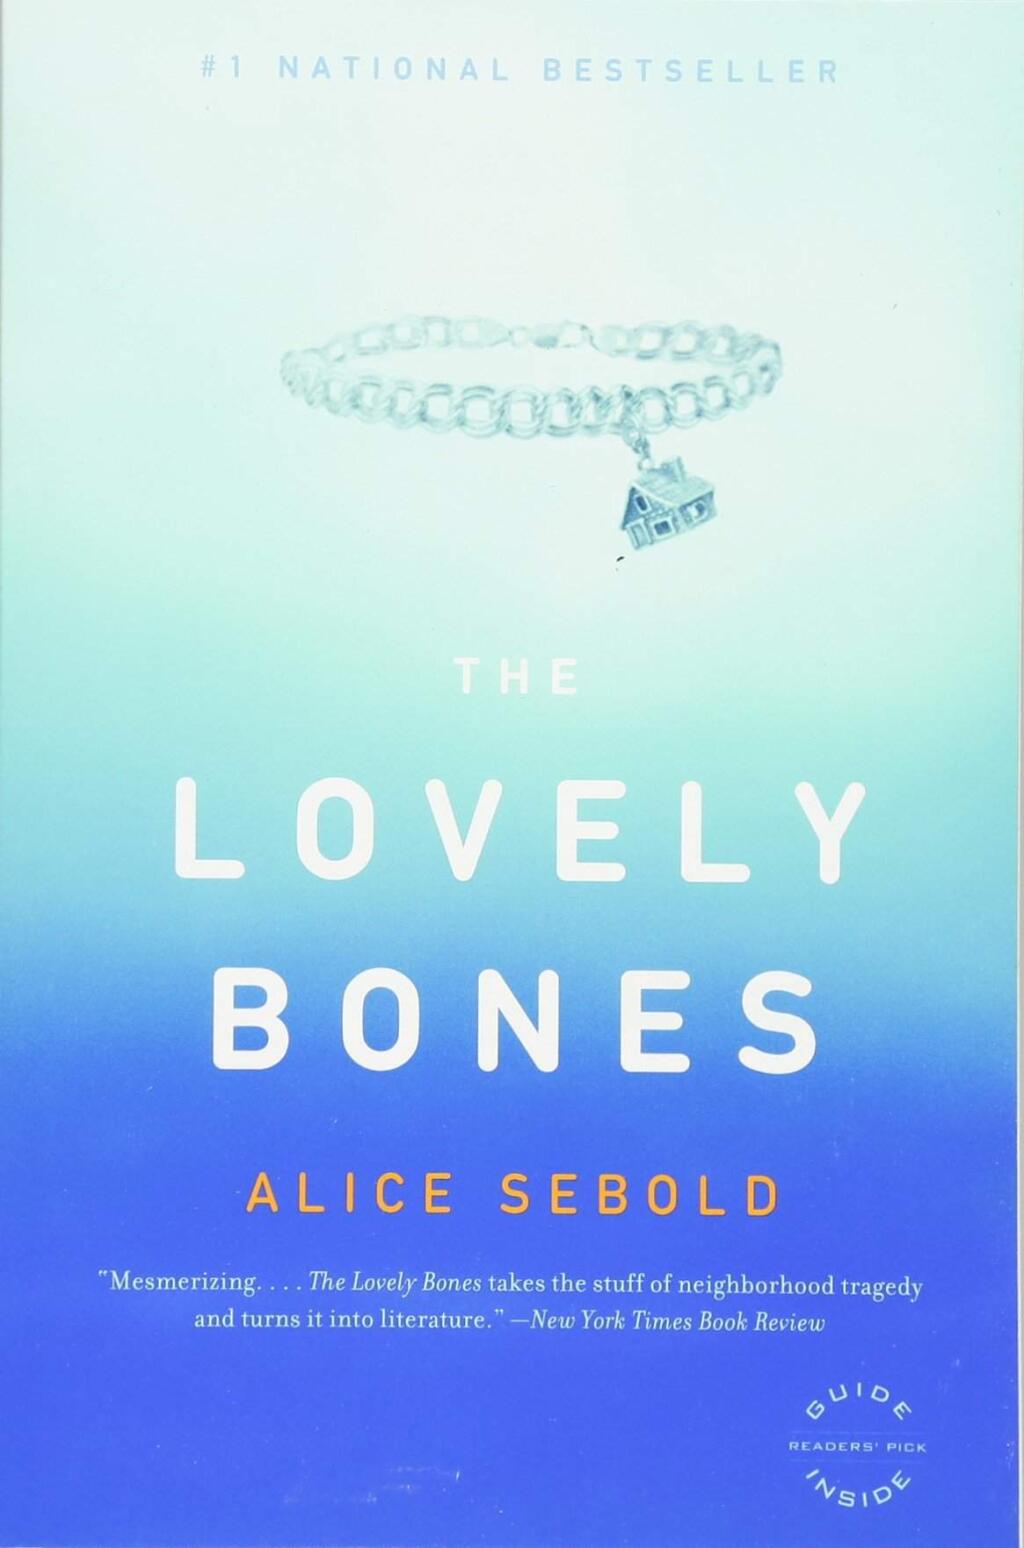 'The Lovely Bones' - Alice Sebold: 14-year-old Susie Salmon sees life unfold from heaven after her death, watching her family grieve and her killer try to cover up the evidence. At one point, her mother flees to Sonoma County and starts working at a winery in Santa Rosa. This story takes place in the mid-'70s. GoodReads reviewers gave this book a 3.79 out of 5 stars. (Amazon)